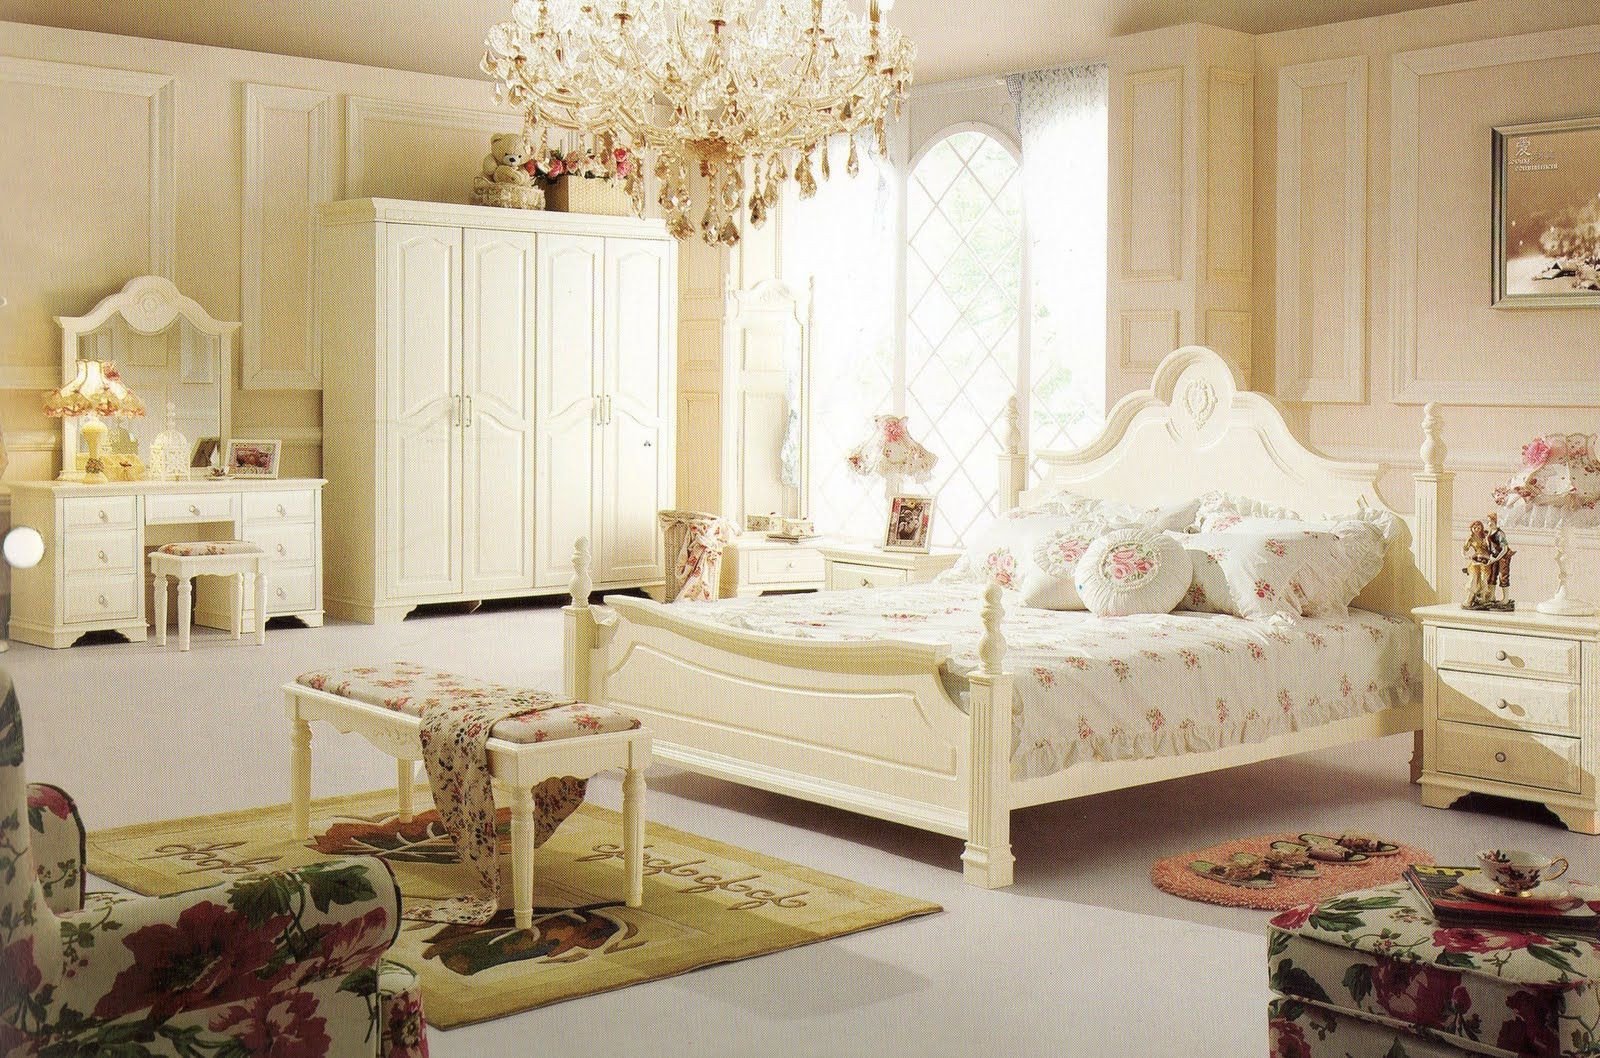 French Country Bedroom Ideas New Elegant Small Bedroom Design Ideas Stylish Art touching